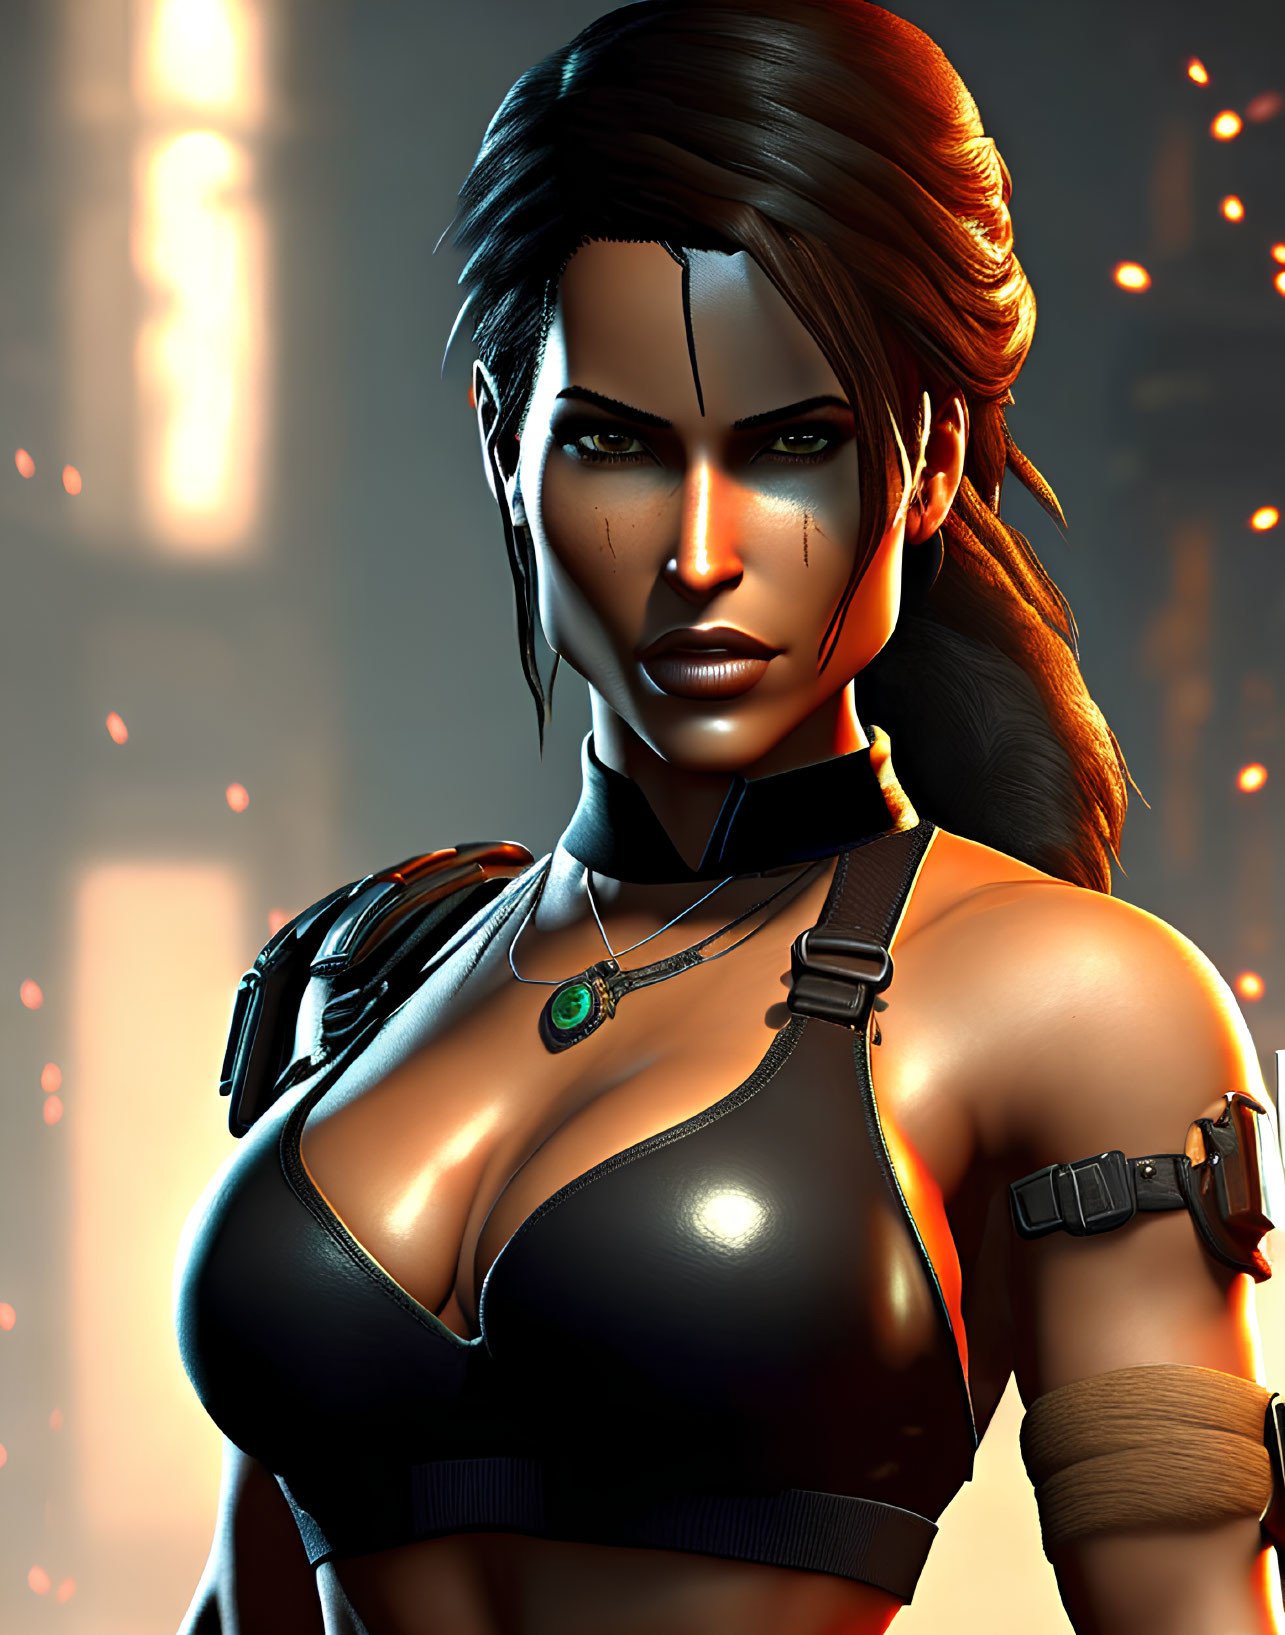 Digital art: Female character with brown hair, intense eyes, black tactical outfit, necklace, in dim